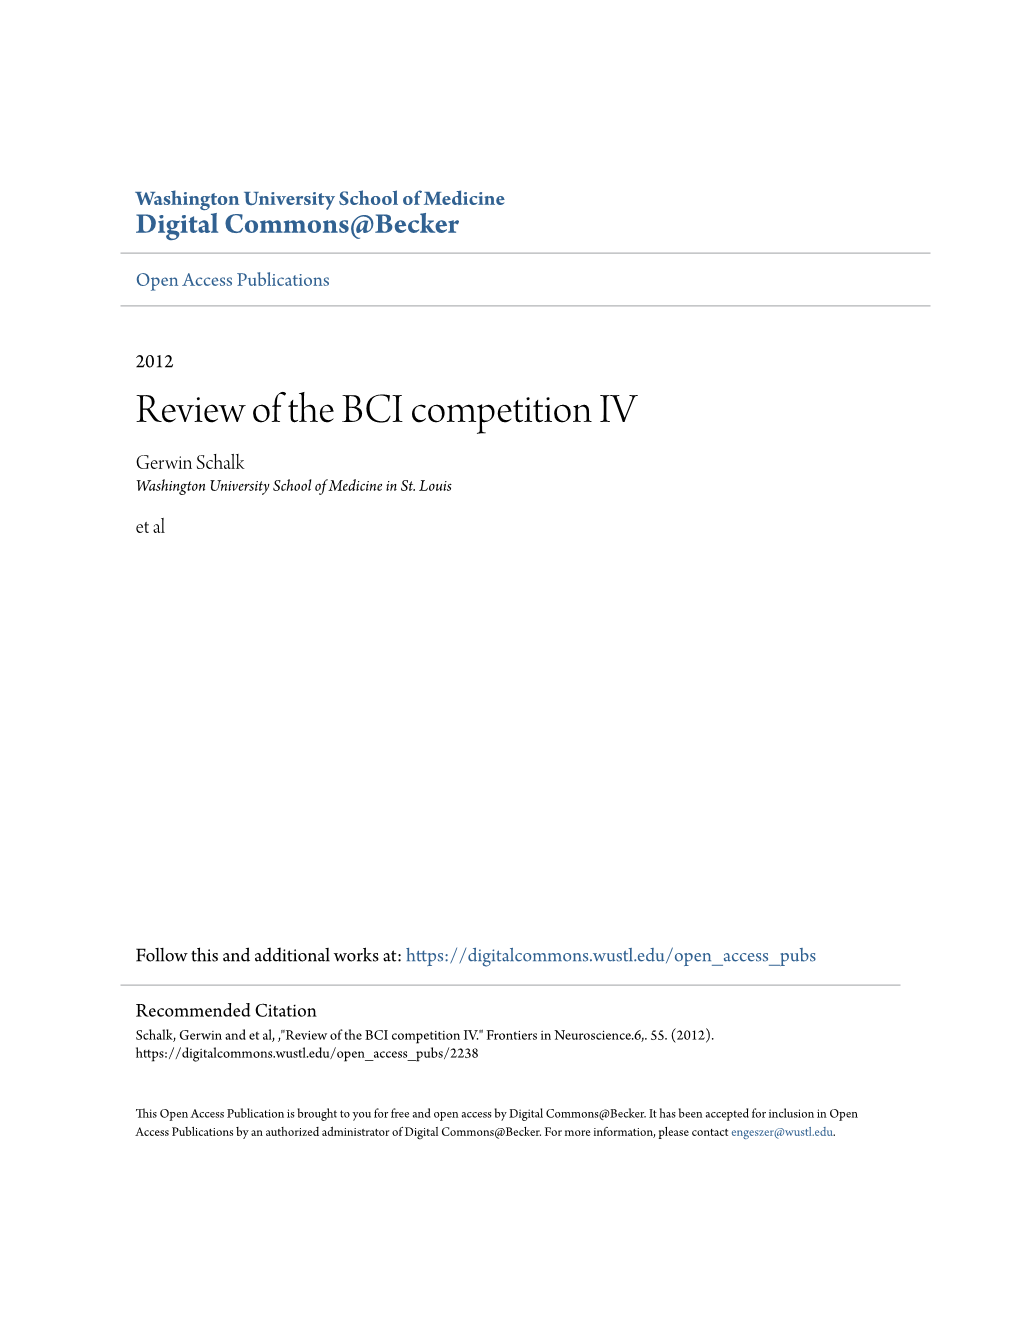 Review of the BCI Competition IV Gerwin Schalk Washington University School of Medicine in St